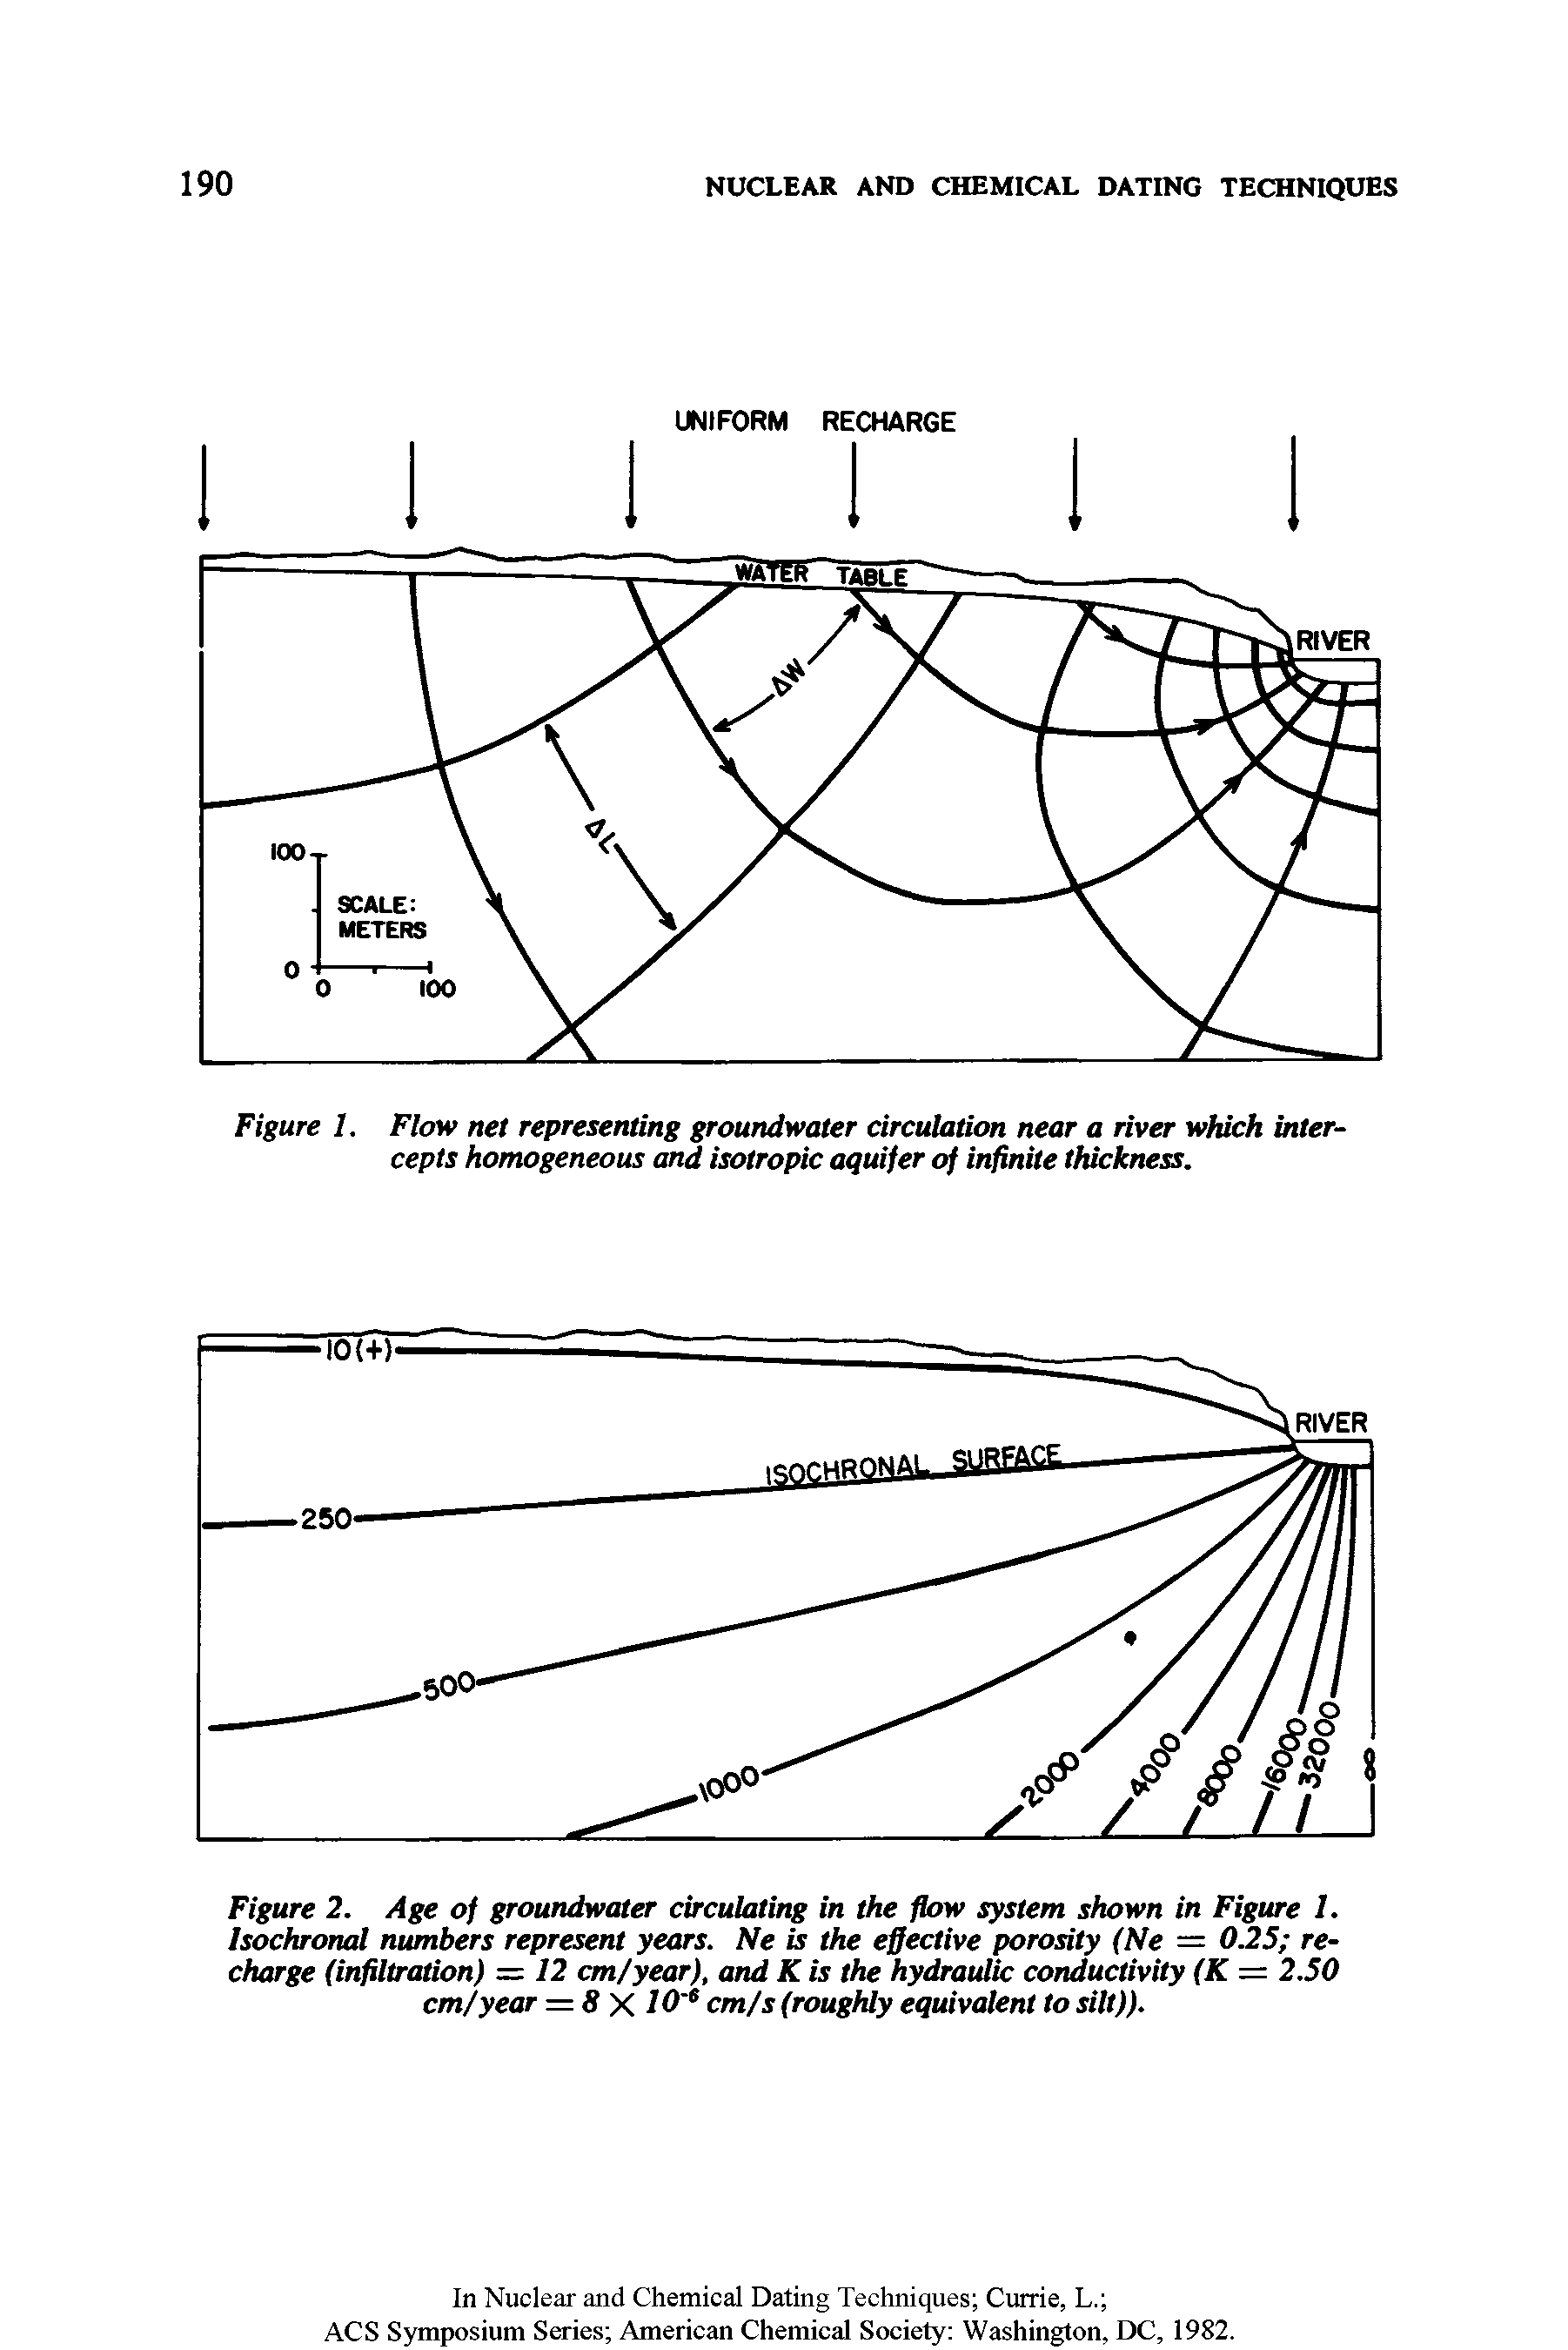 Figure 1. Flow net representing groundwater circulation near a river which intercepts homogeneous and isotropic aquifer of infinite thickness.